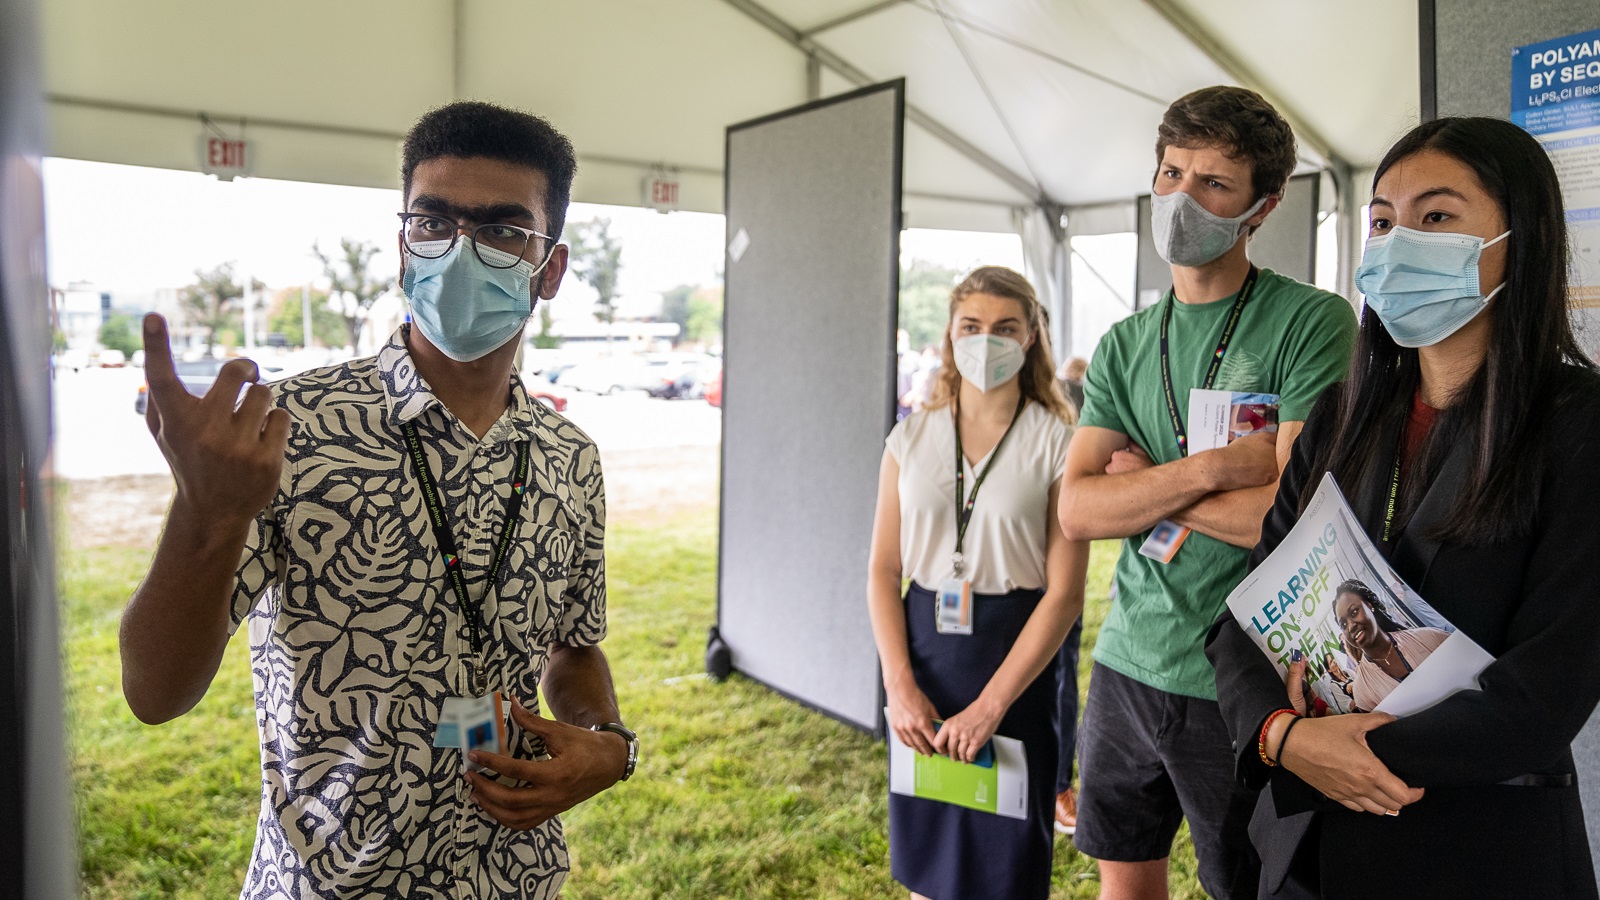 As a culmination of summer internships, Argonne hosted Learning On the Lawn, an in-person poster presentation symposium. Students in summer appointments presented their work to the laboratory community. Approximately 100 students presented their work at this presentation symposium.